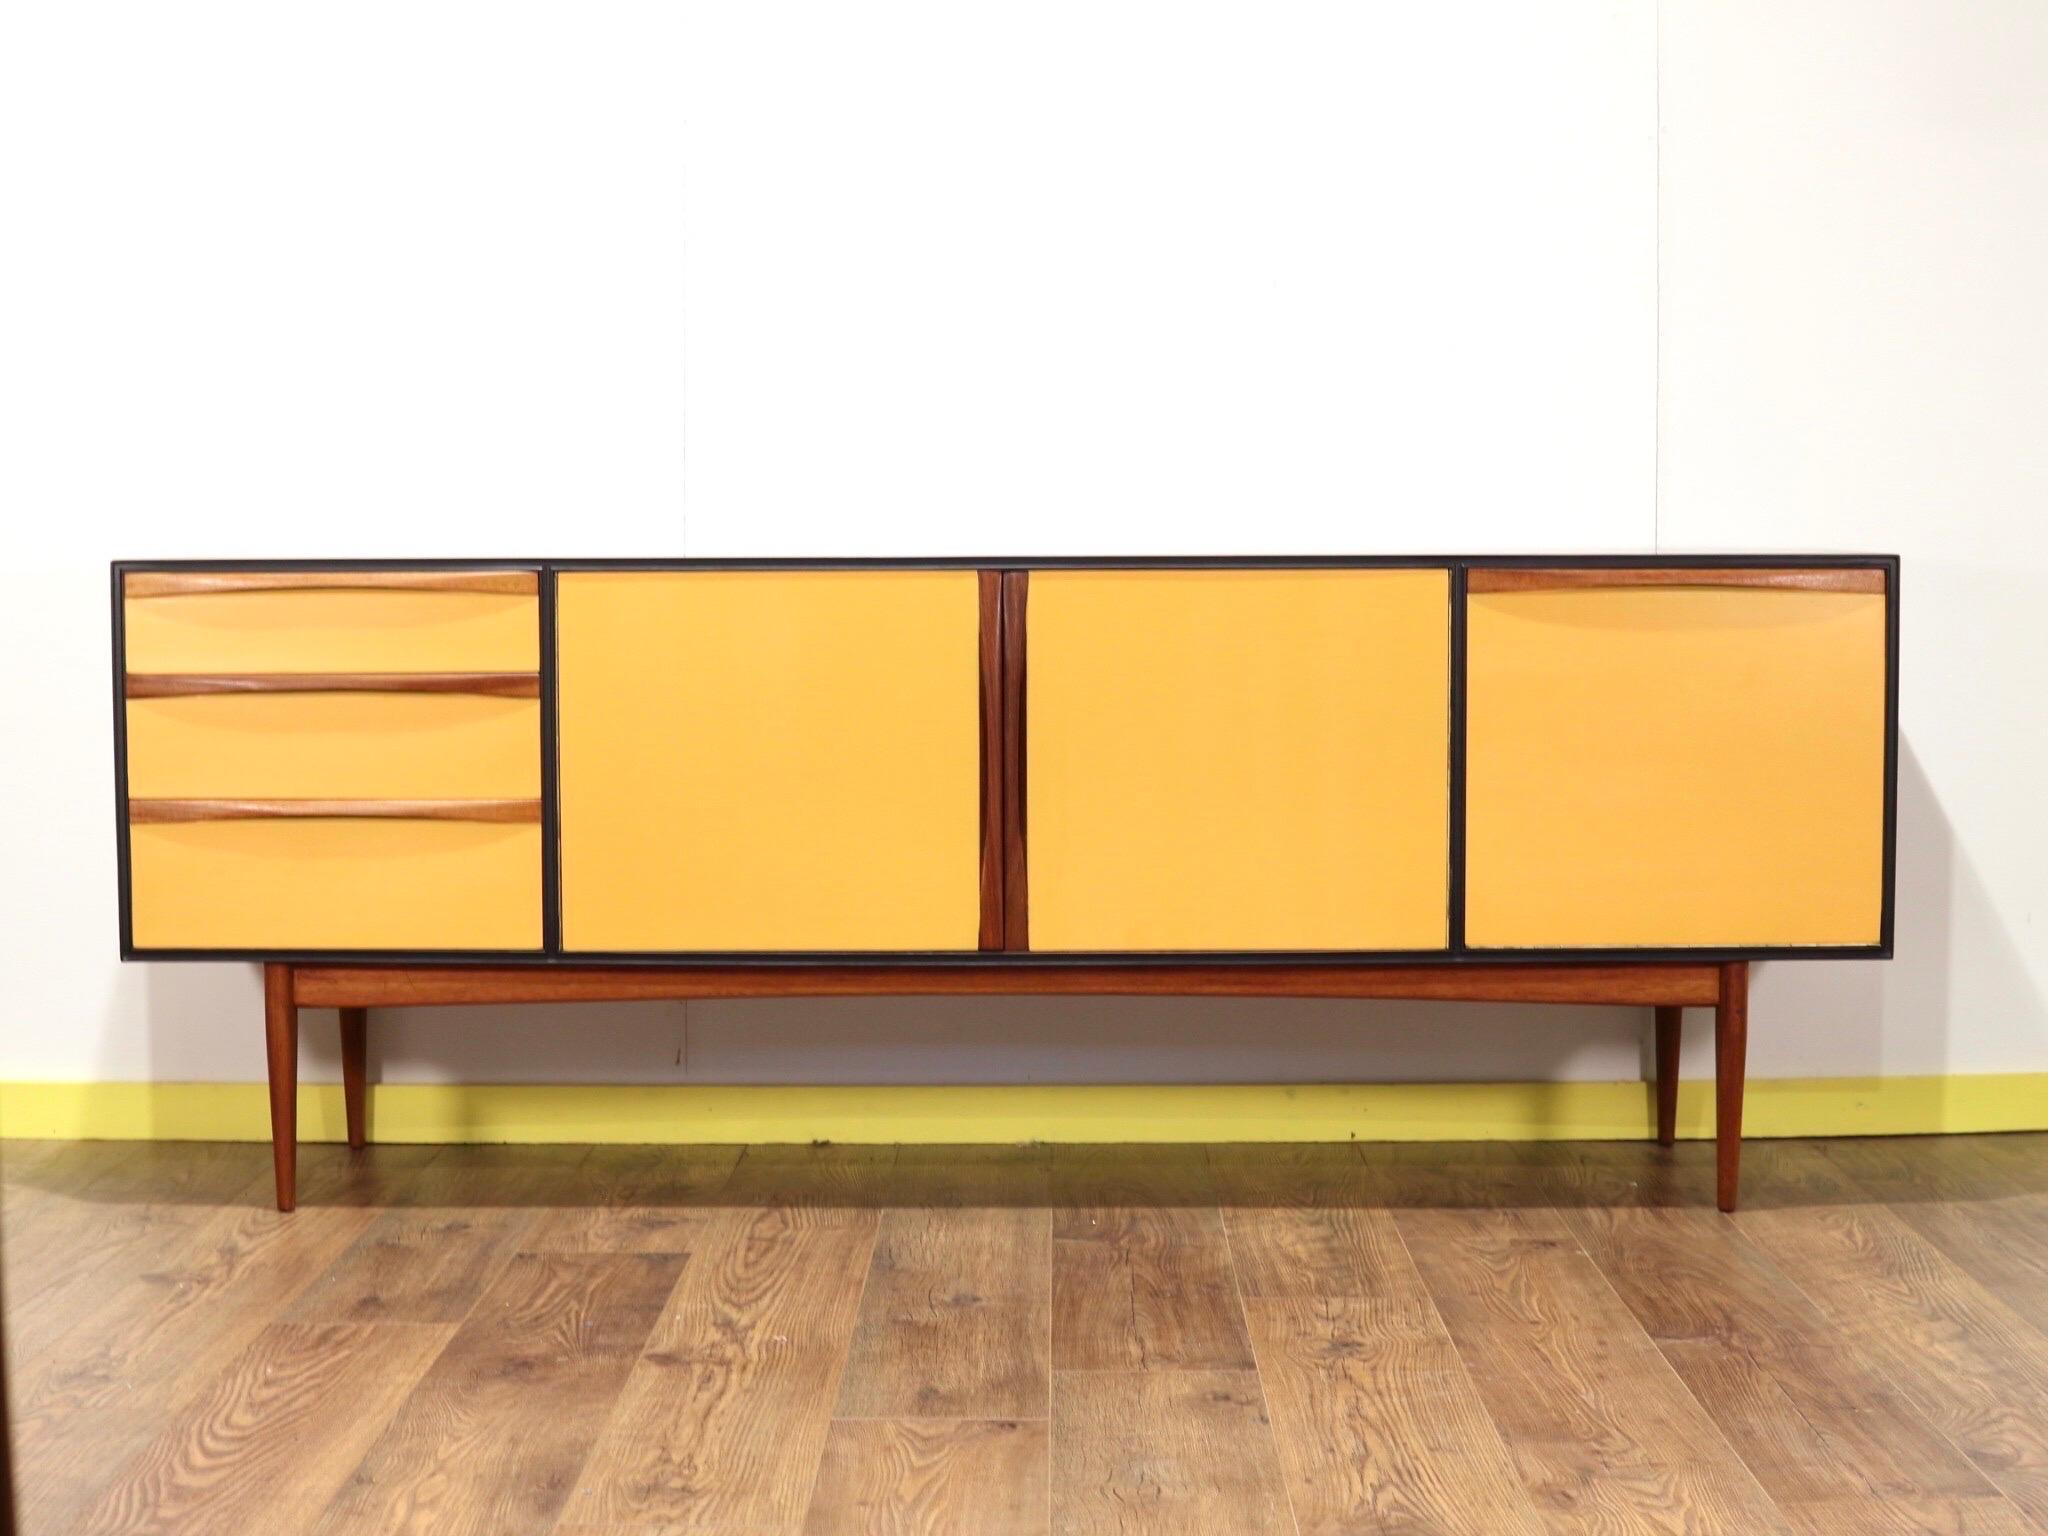 This truly stunnng sideboard is a real head turner. The credenza is made by A.H Mcintosh of Scotland and has some fantastic design. The crednza is not in its original colour but has been painted in fabulous style that really showcases this piece.